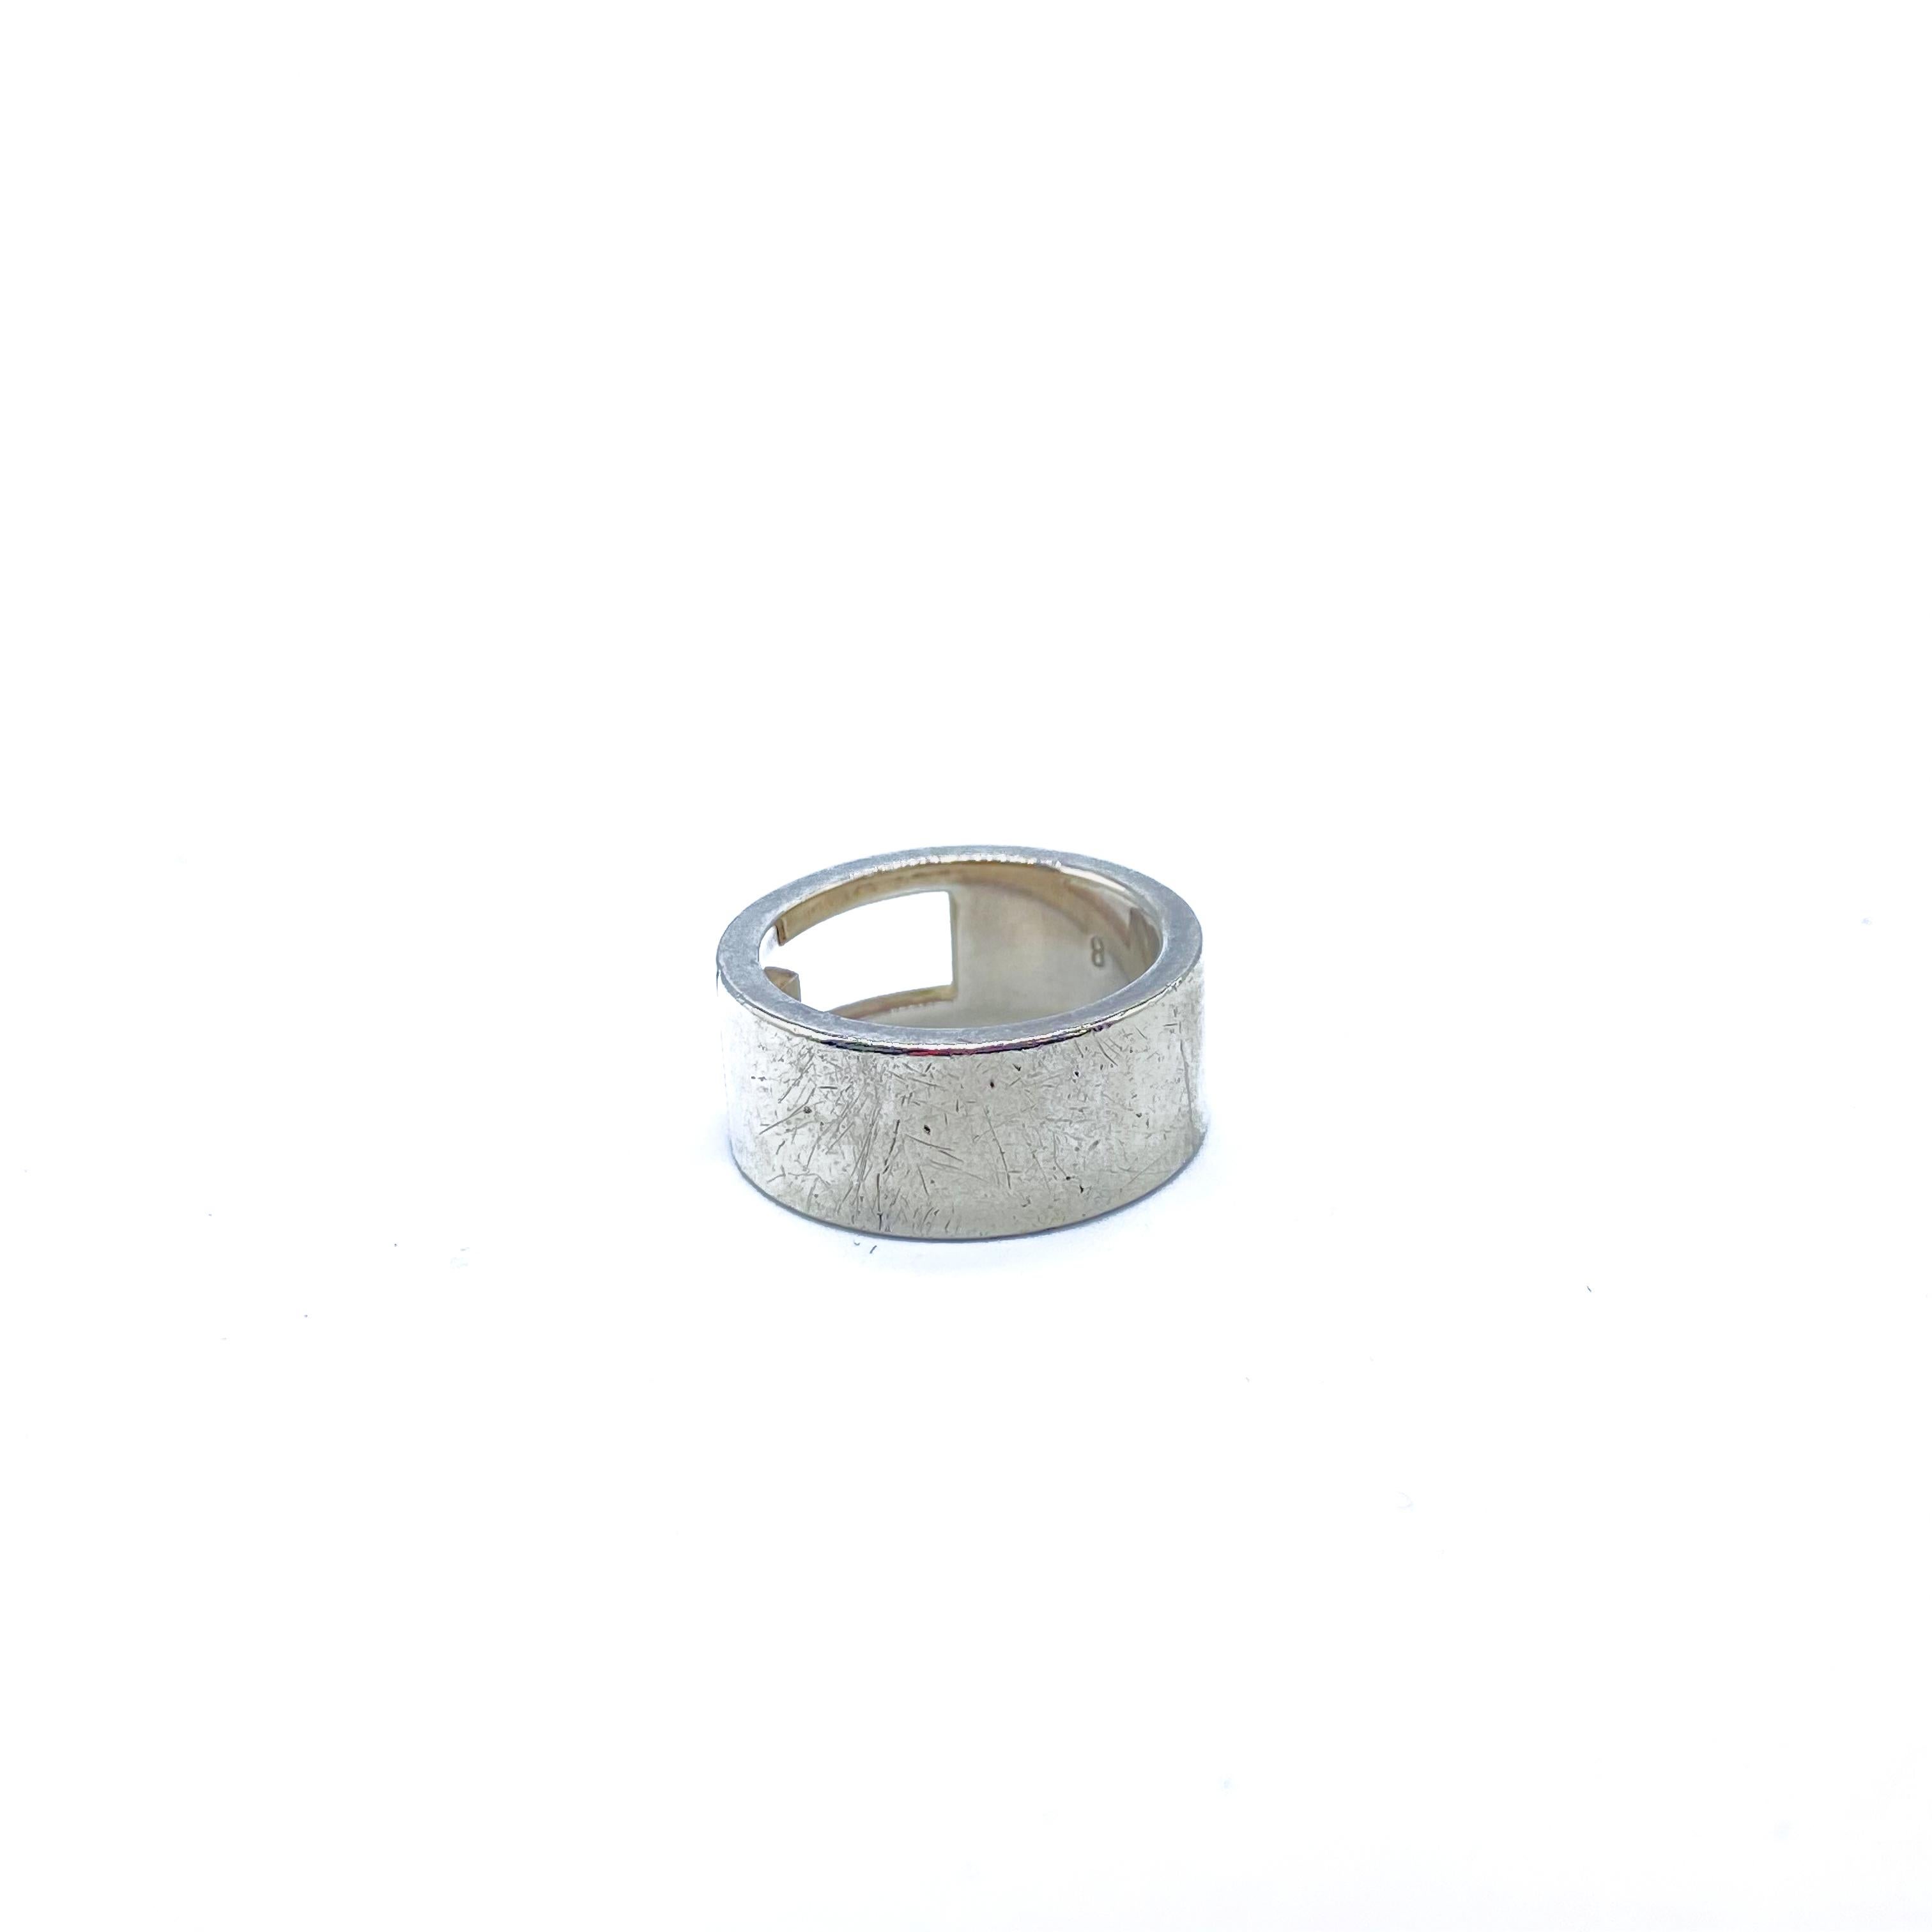 Gucci Vintage 1990s Sterling Silver Ring

Timelessly cool ring from Gucci

Detail
-Made in Italy in the 1990s
-Crafted from sterling silver
-Features a cut out G for G logo

Size & Fit
-Ring size 4.5
-Width - 0.5 inches
-Weight - 7g

Authenticity &